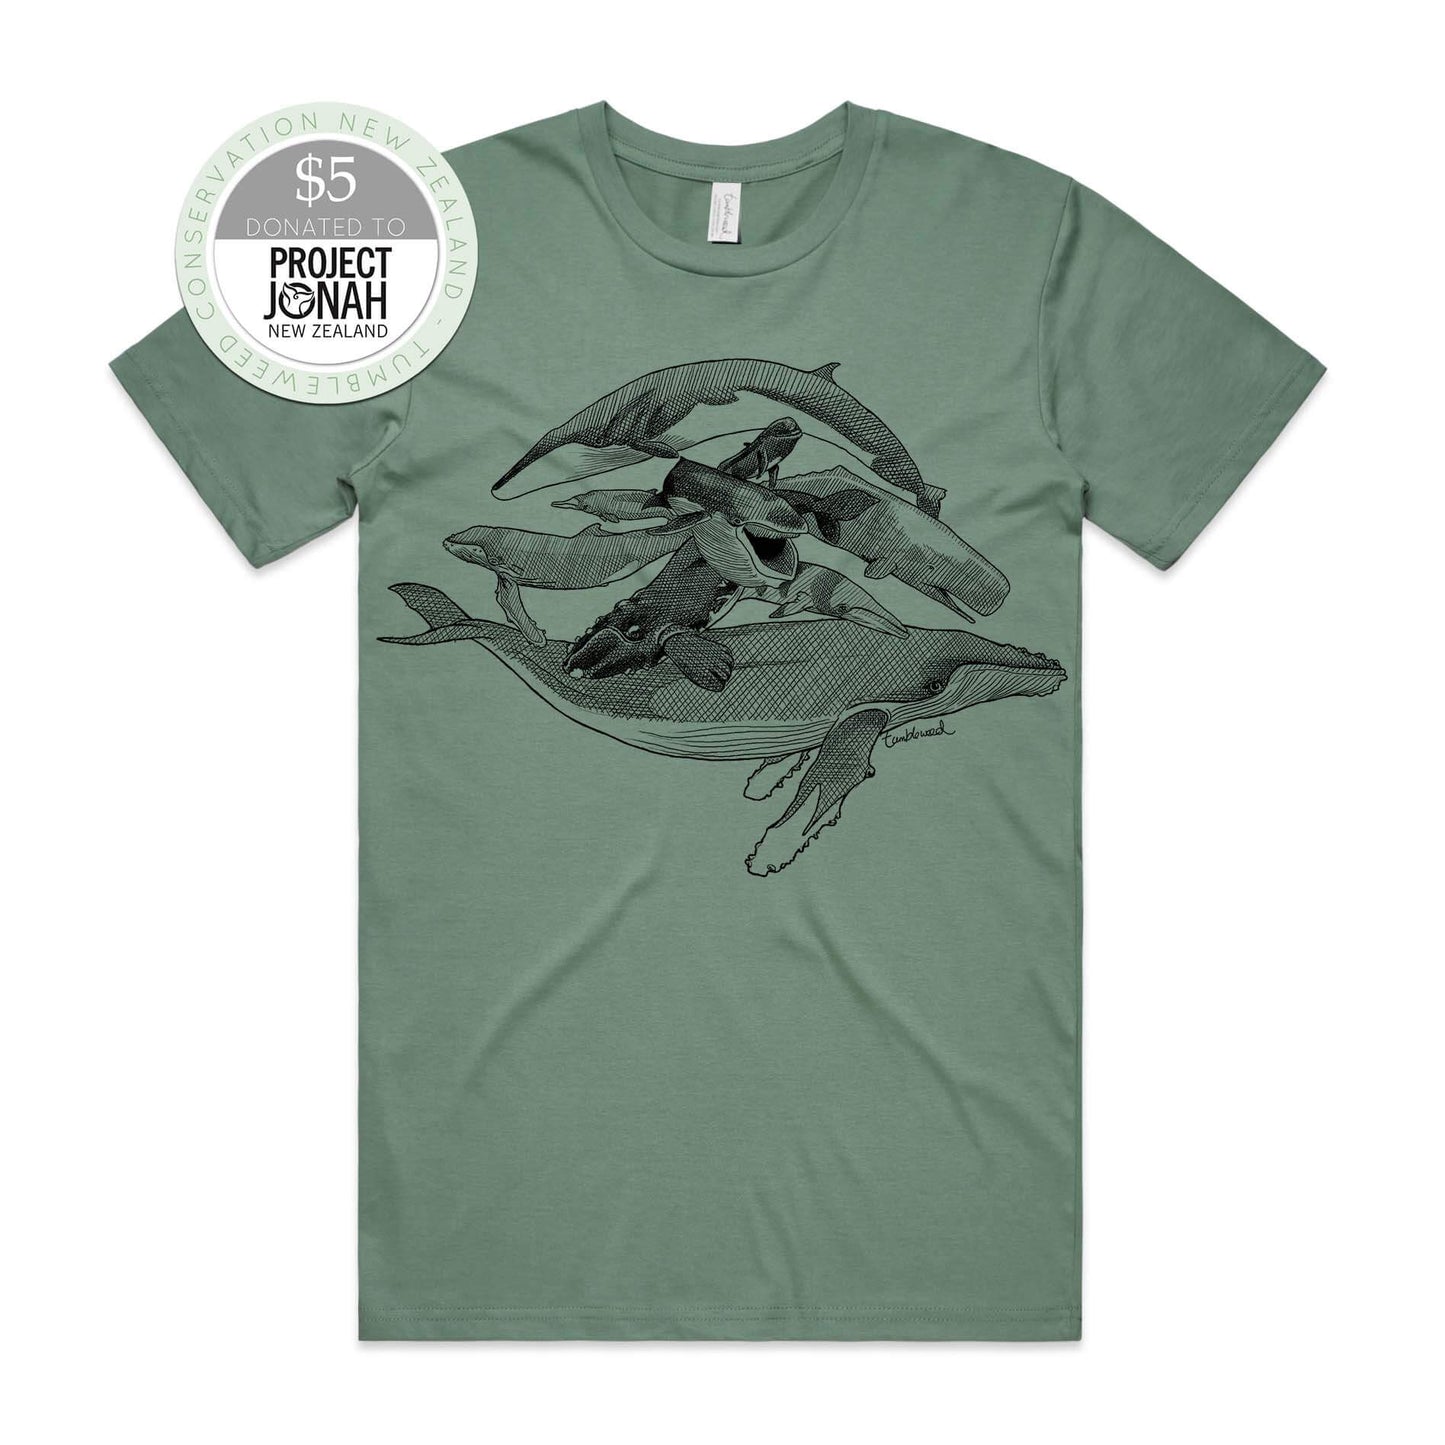 Sage, male t-shirt featuring a screen printed Whales design.